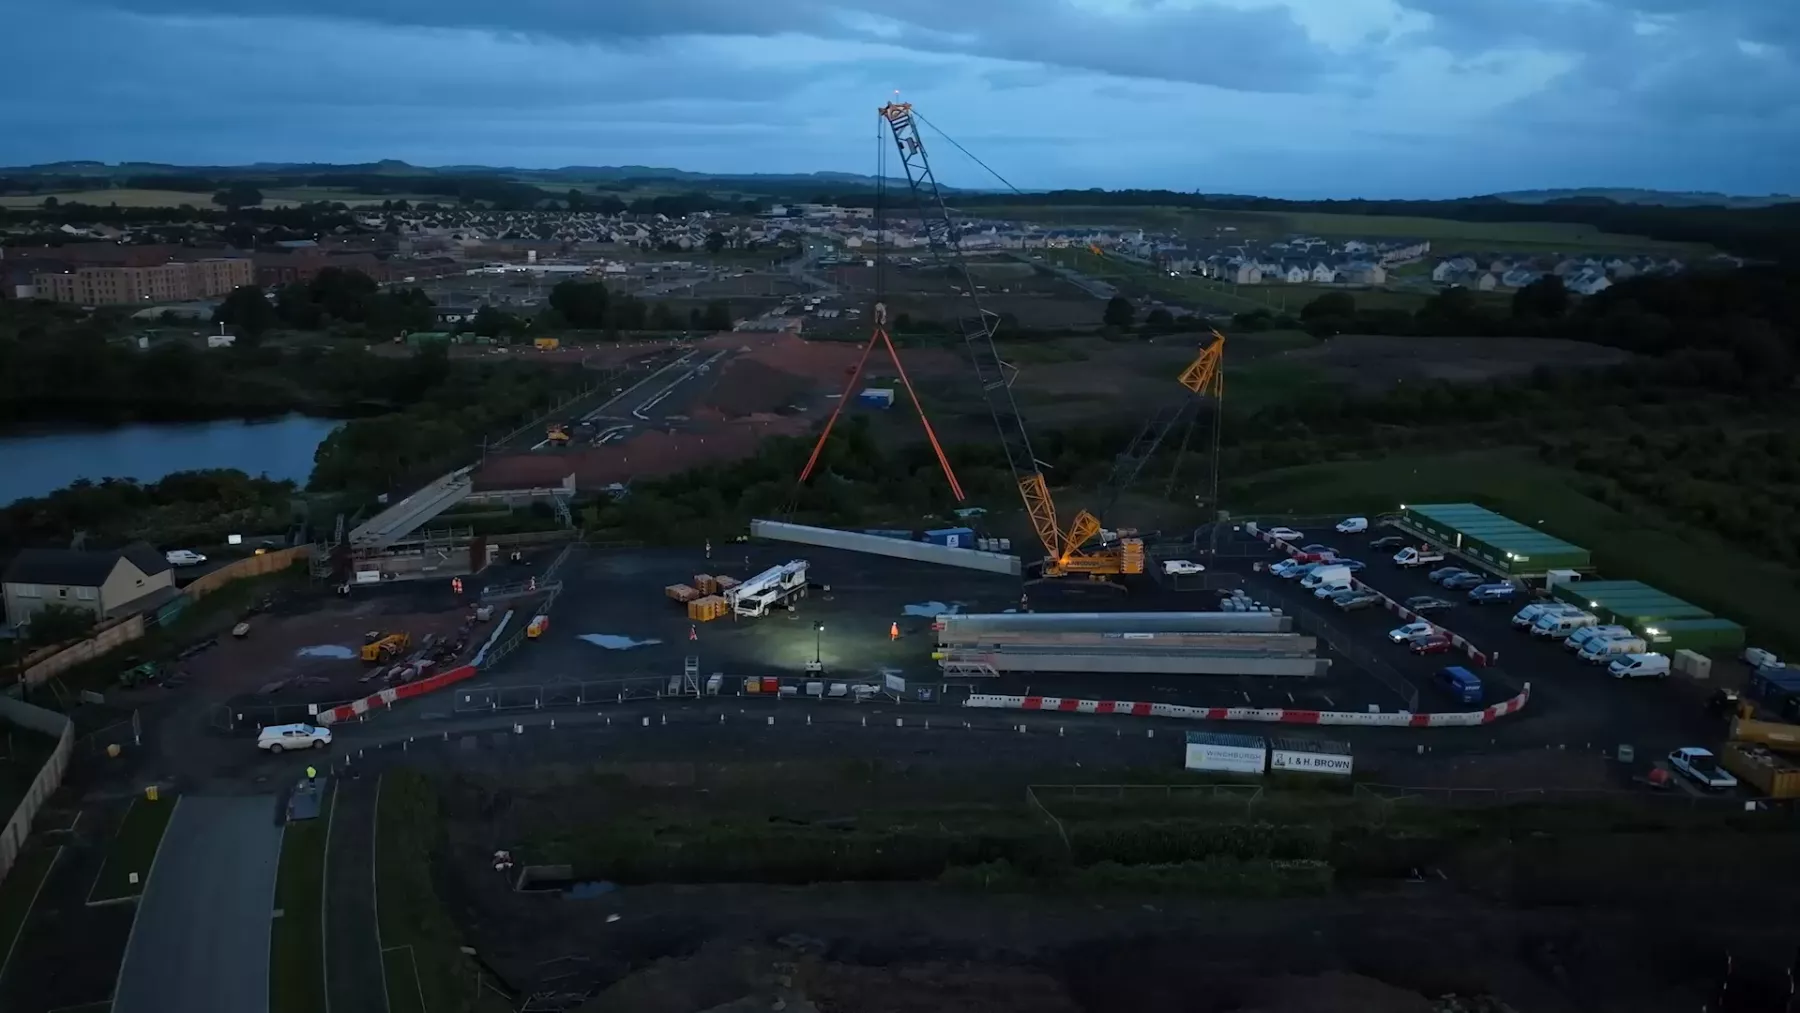 Shot from a drone - workers dressed in orange hi-vis clothing in the very early morning in low light beside the railway line at Winchburgh, West Lothian. A new bridge is being constructed. Floodlights are in use in places as a crane lifts sections of the bridge.